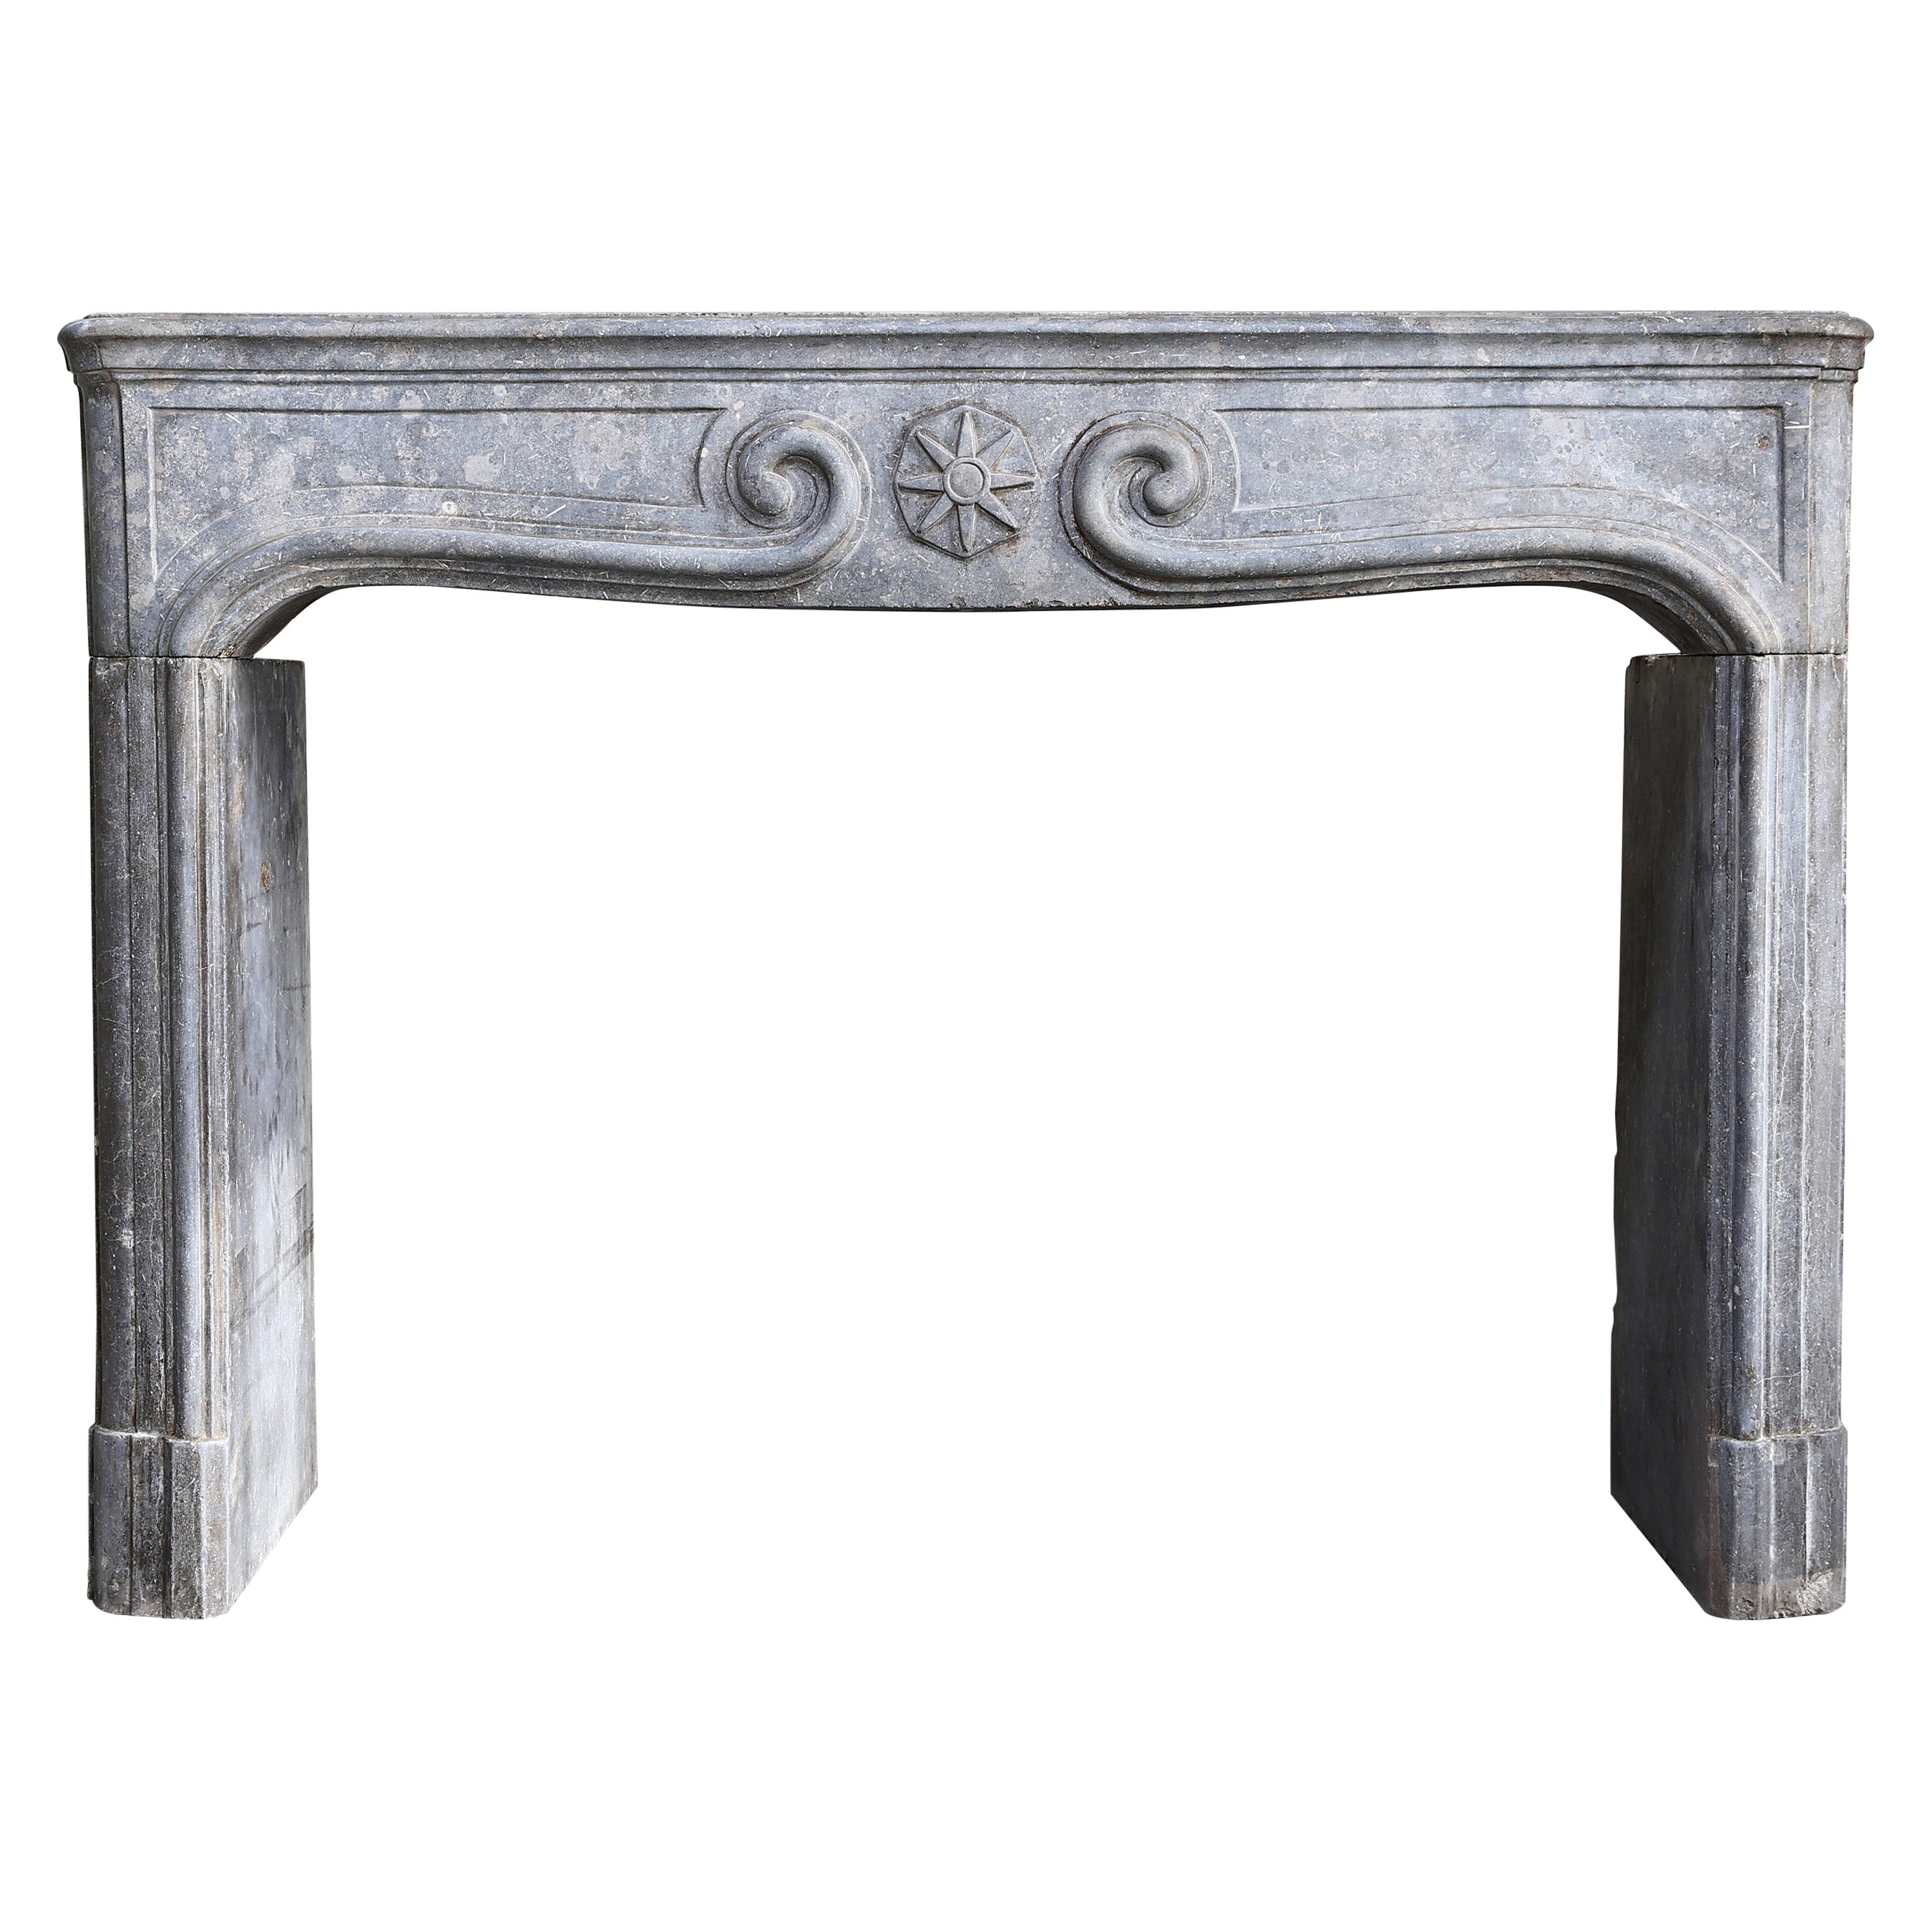 Louis XIV Style Fireplace from the 19th Century of Grey Marble Stone